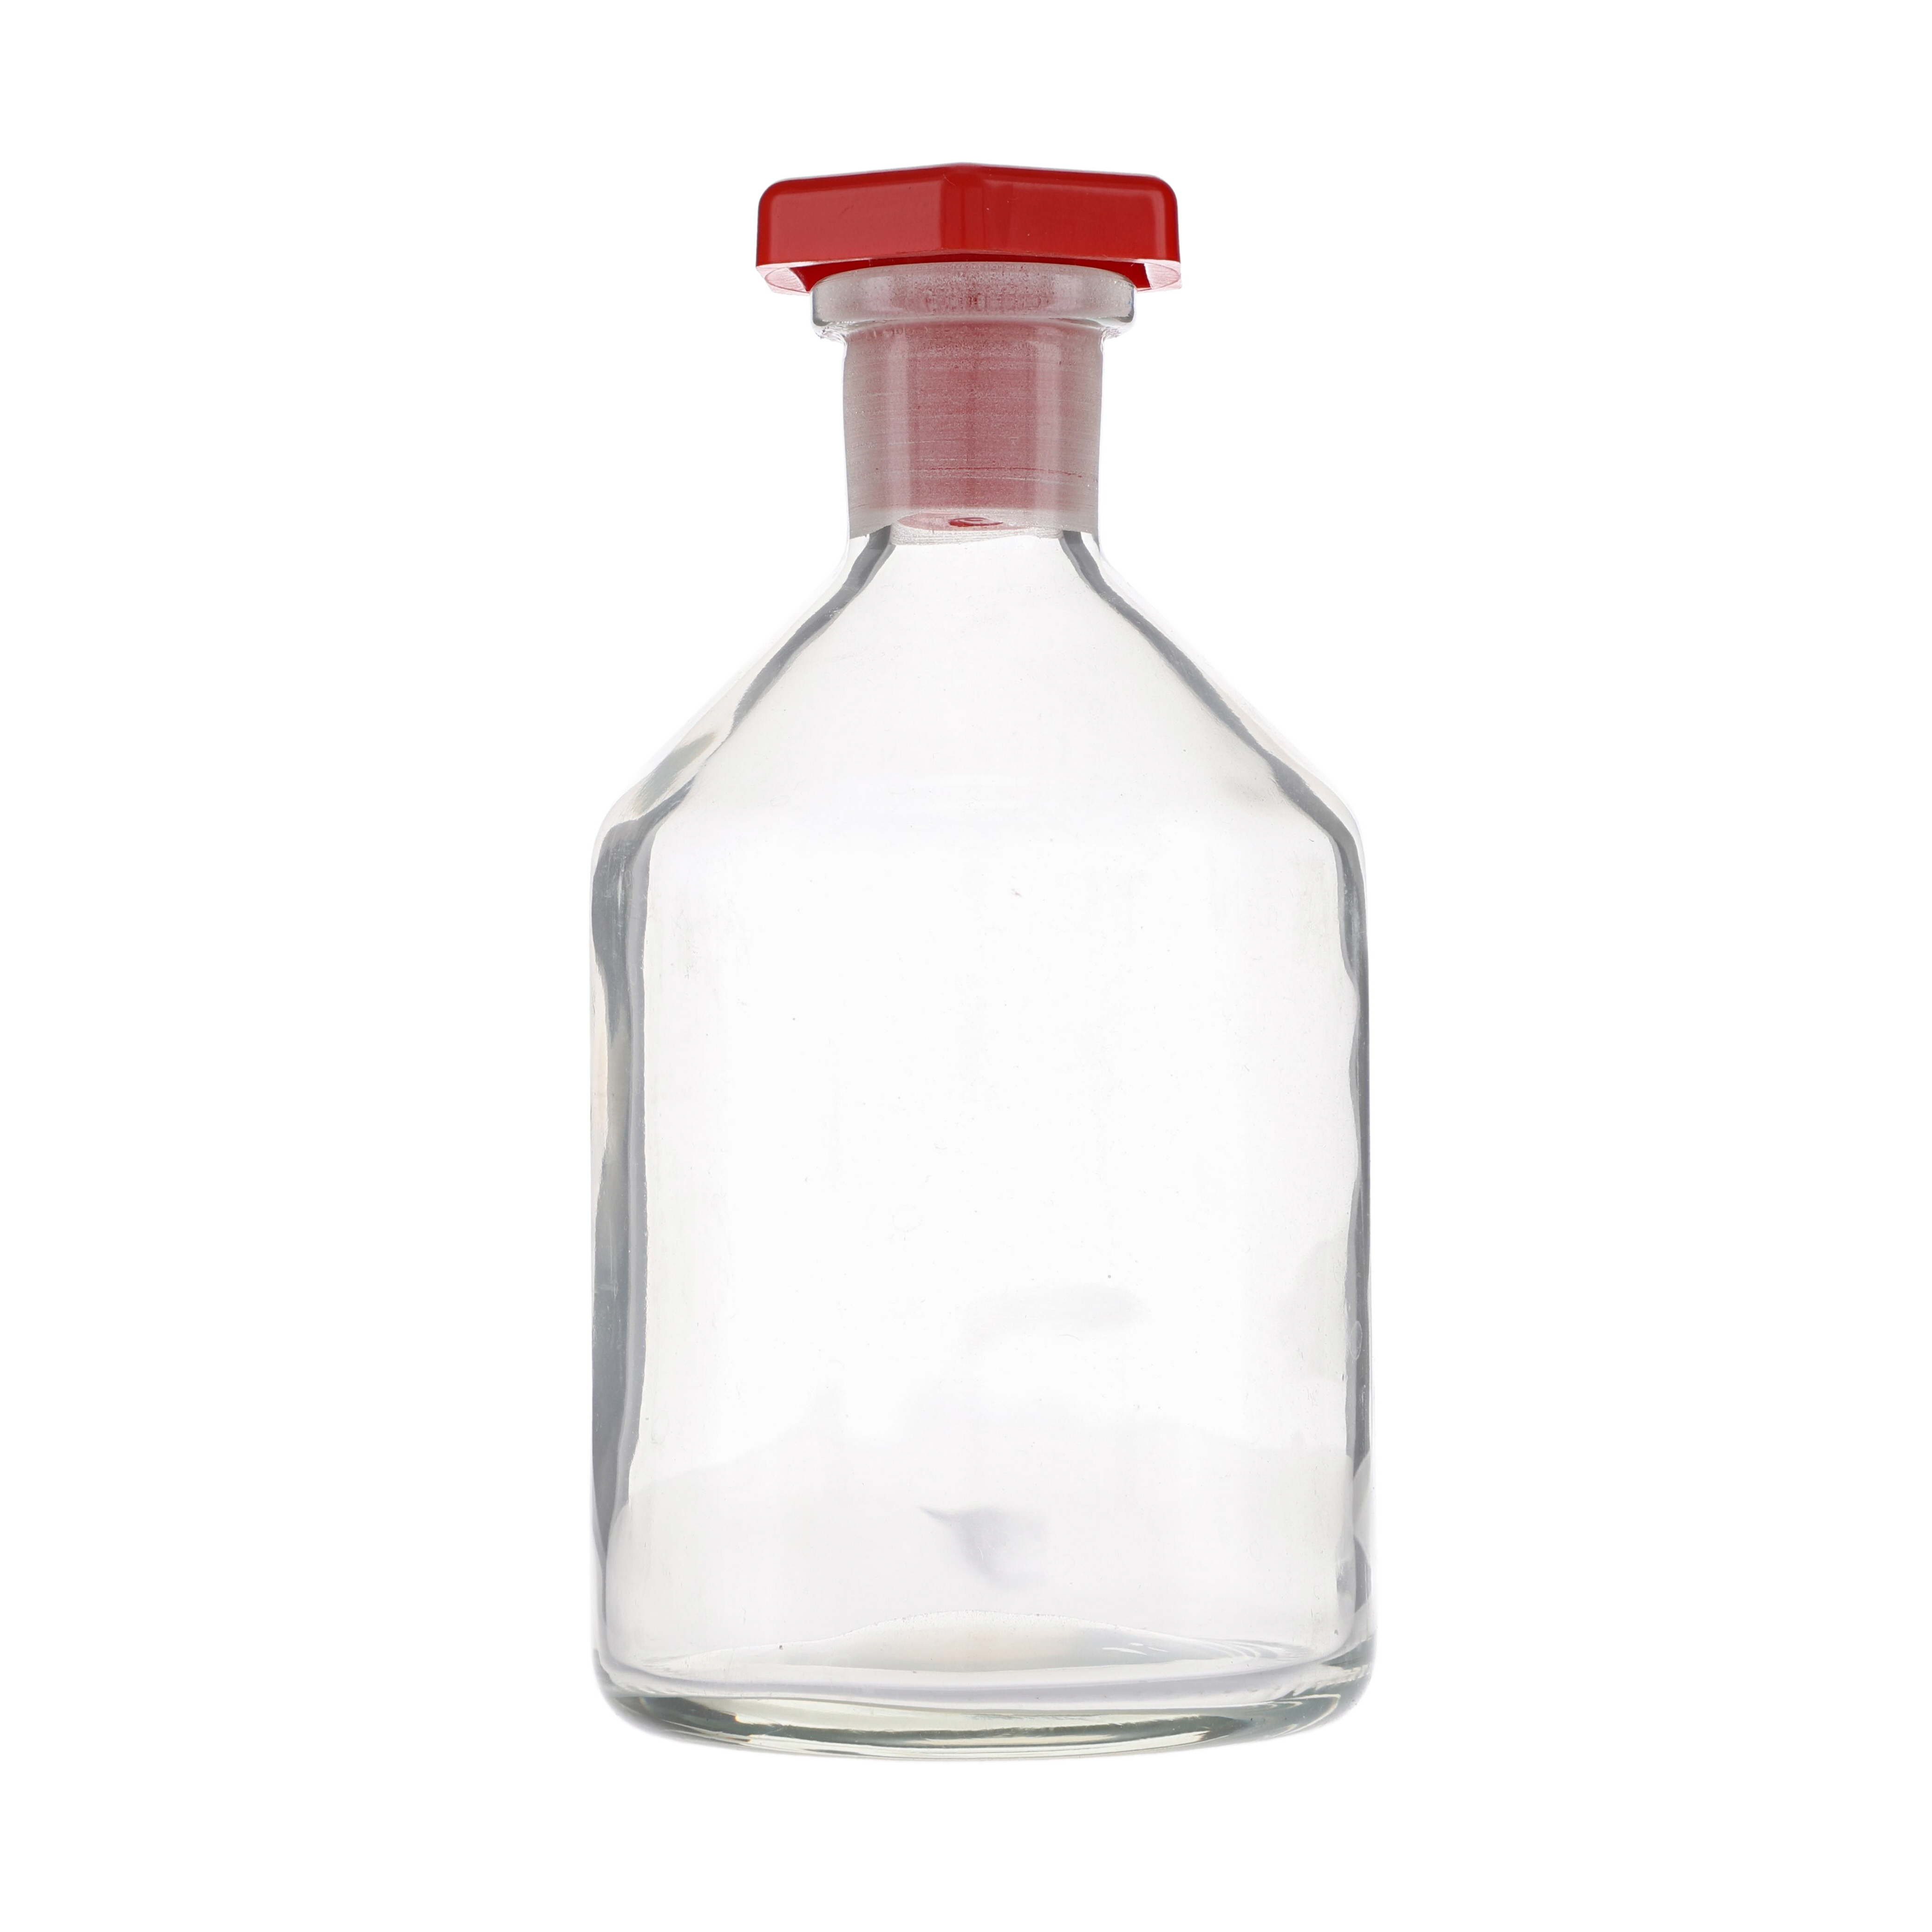 HP00053173 - Polystop' Clear Glass Reagent Bottle, Plastic Coated ...